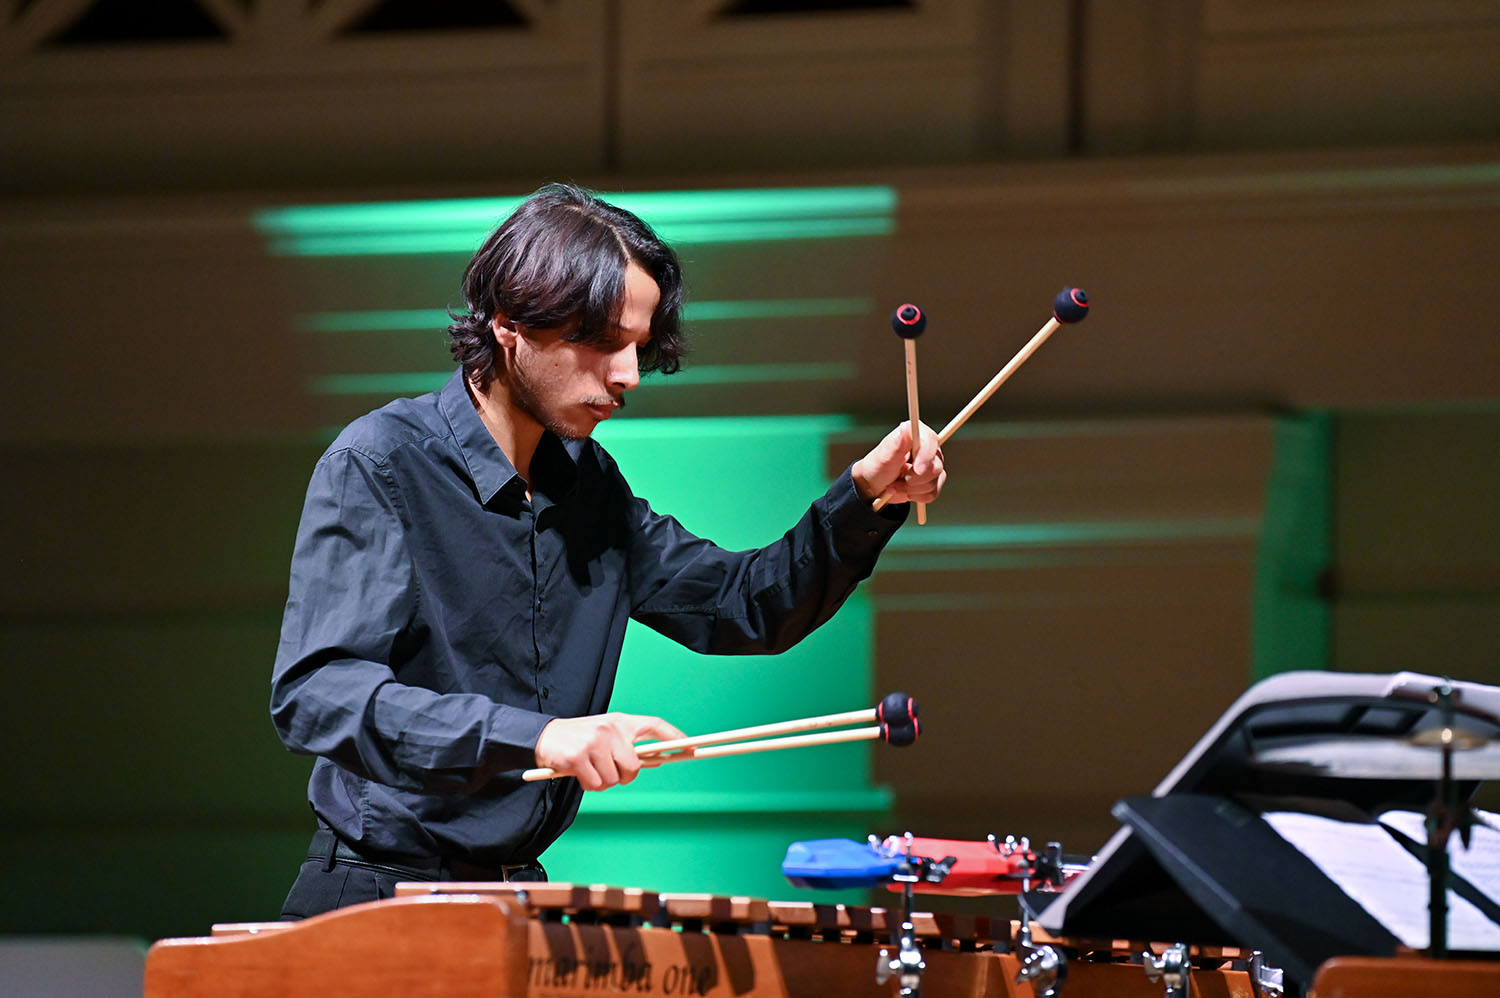 A percussionist on stage in the Performance Hall